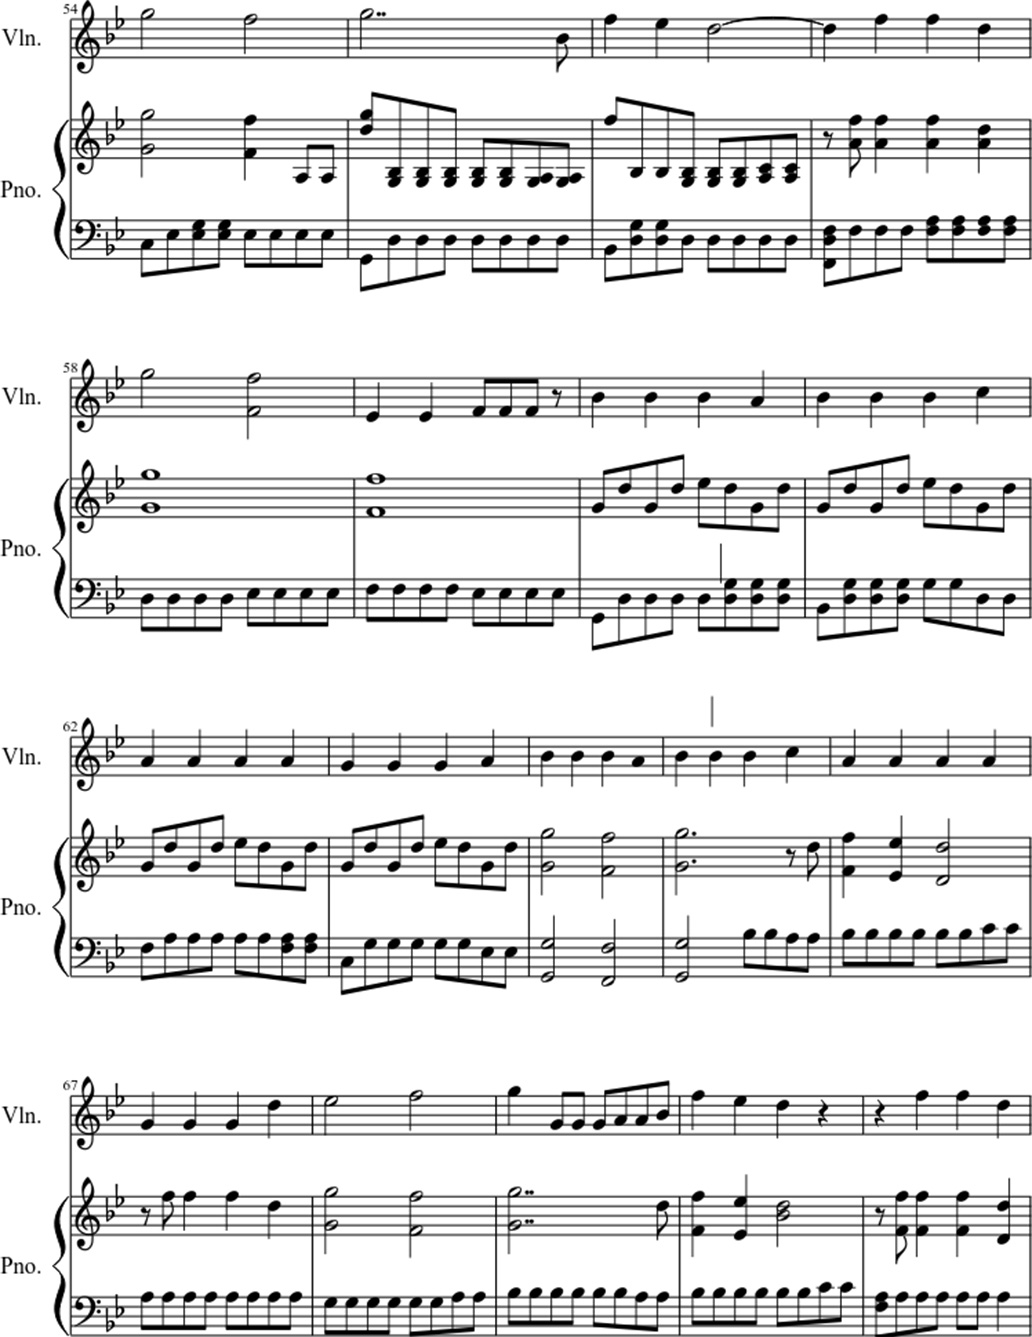 What I've done sheet music notes 4